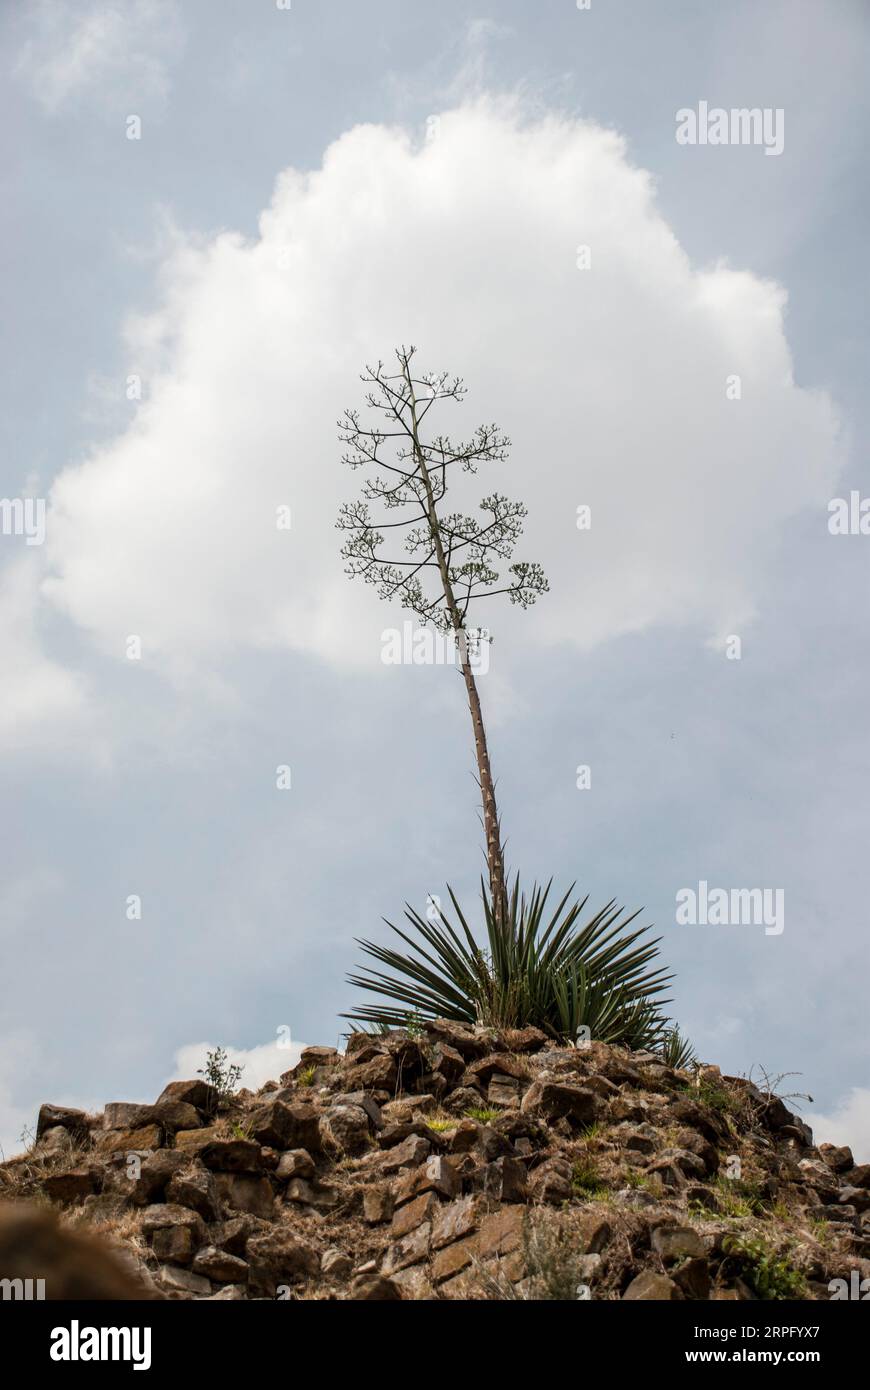 One cactus and a cloudy sky. Stock Photo